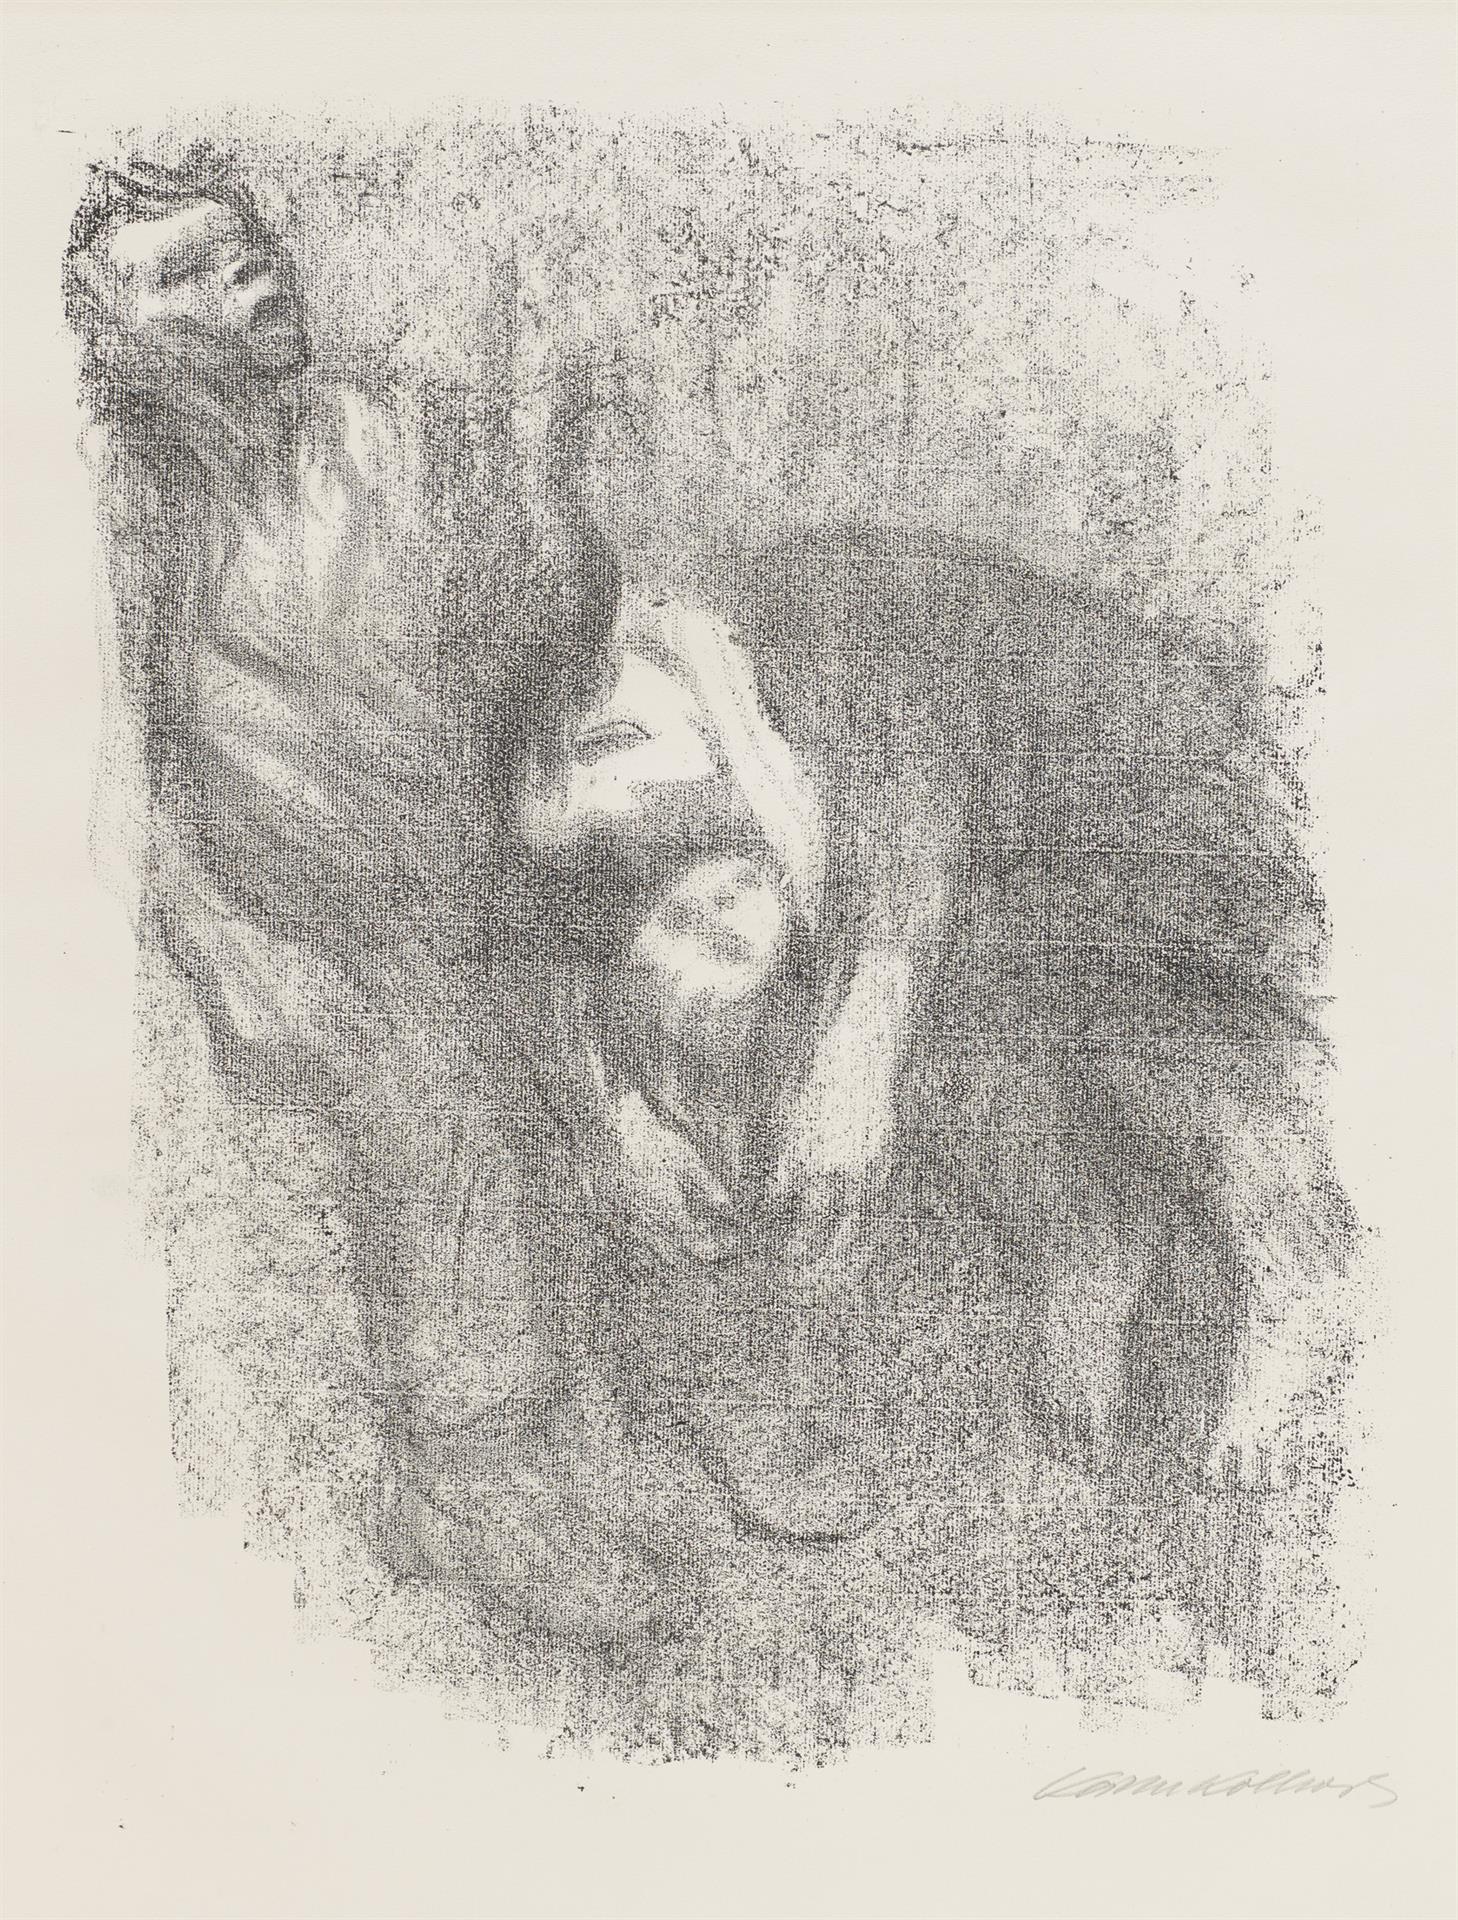 Käthe Kollwitz, Death in the Water, sheet 7 of the series »Death«, 1934, crayon lithograph, Kn 268 b, Cologne Kollwitz Collection © Käthe Kollwitz Museum Köln